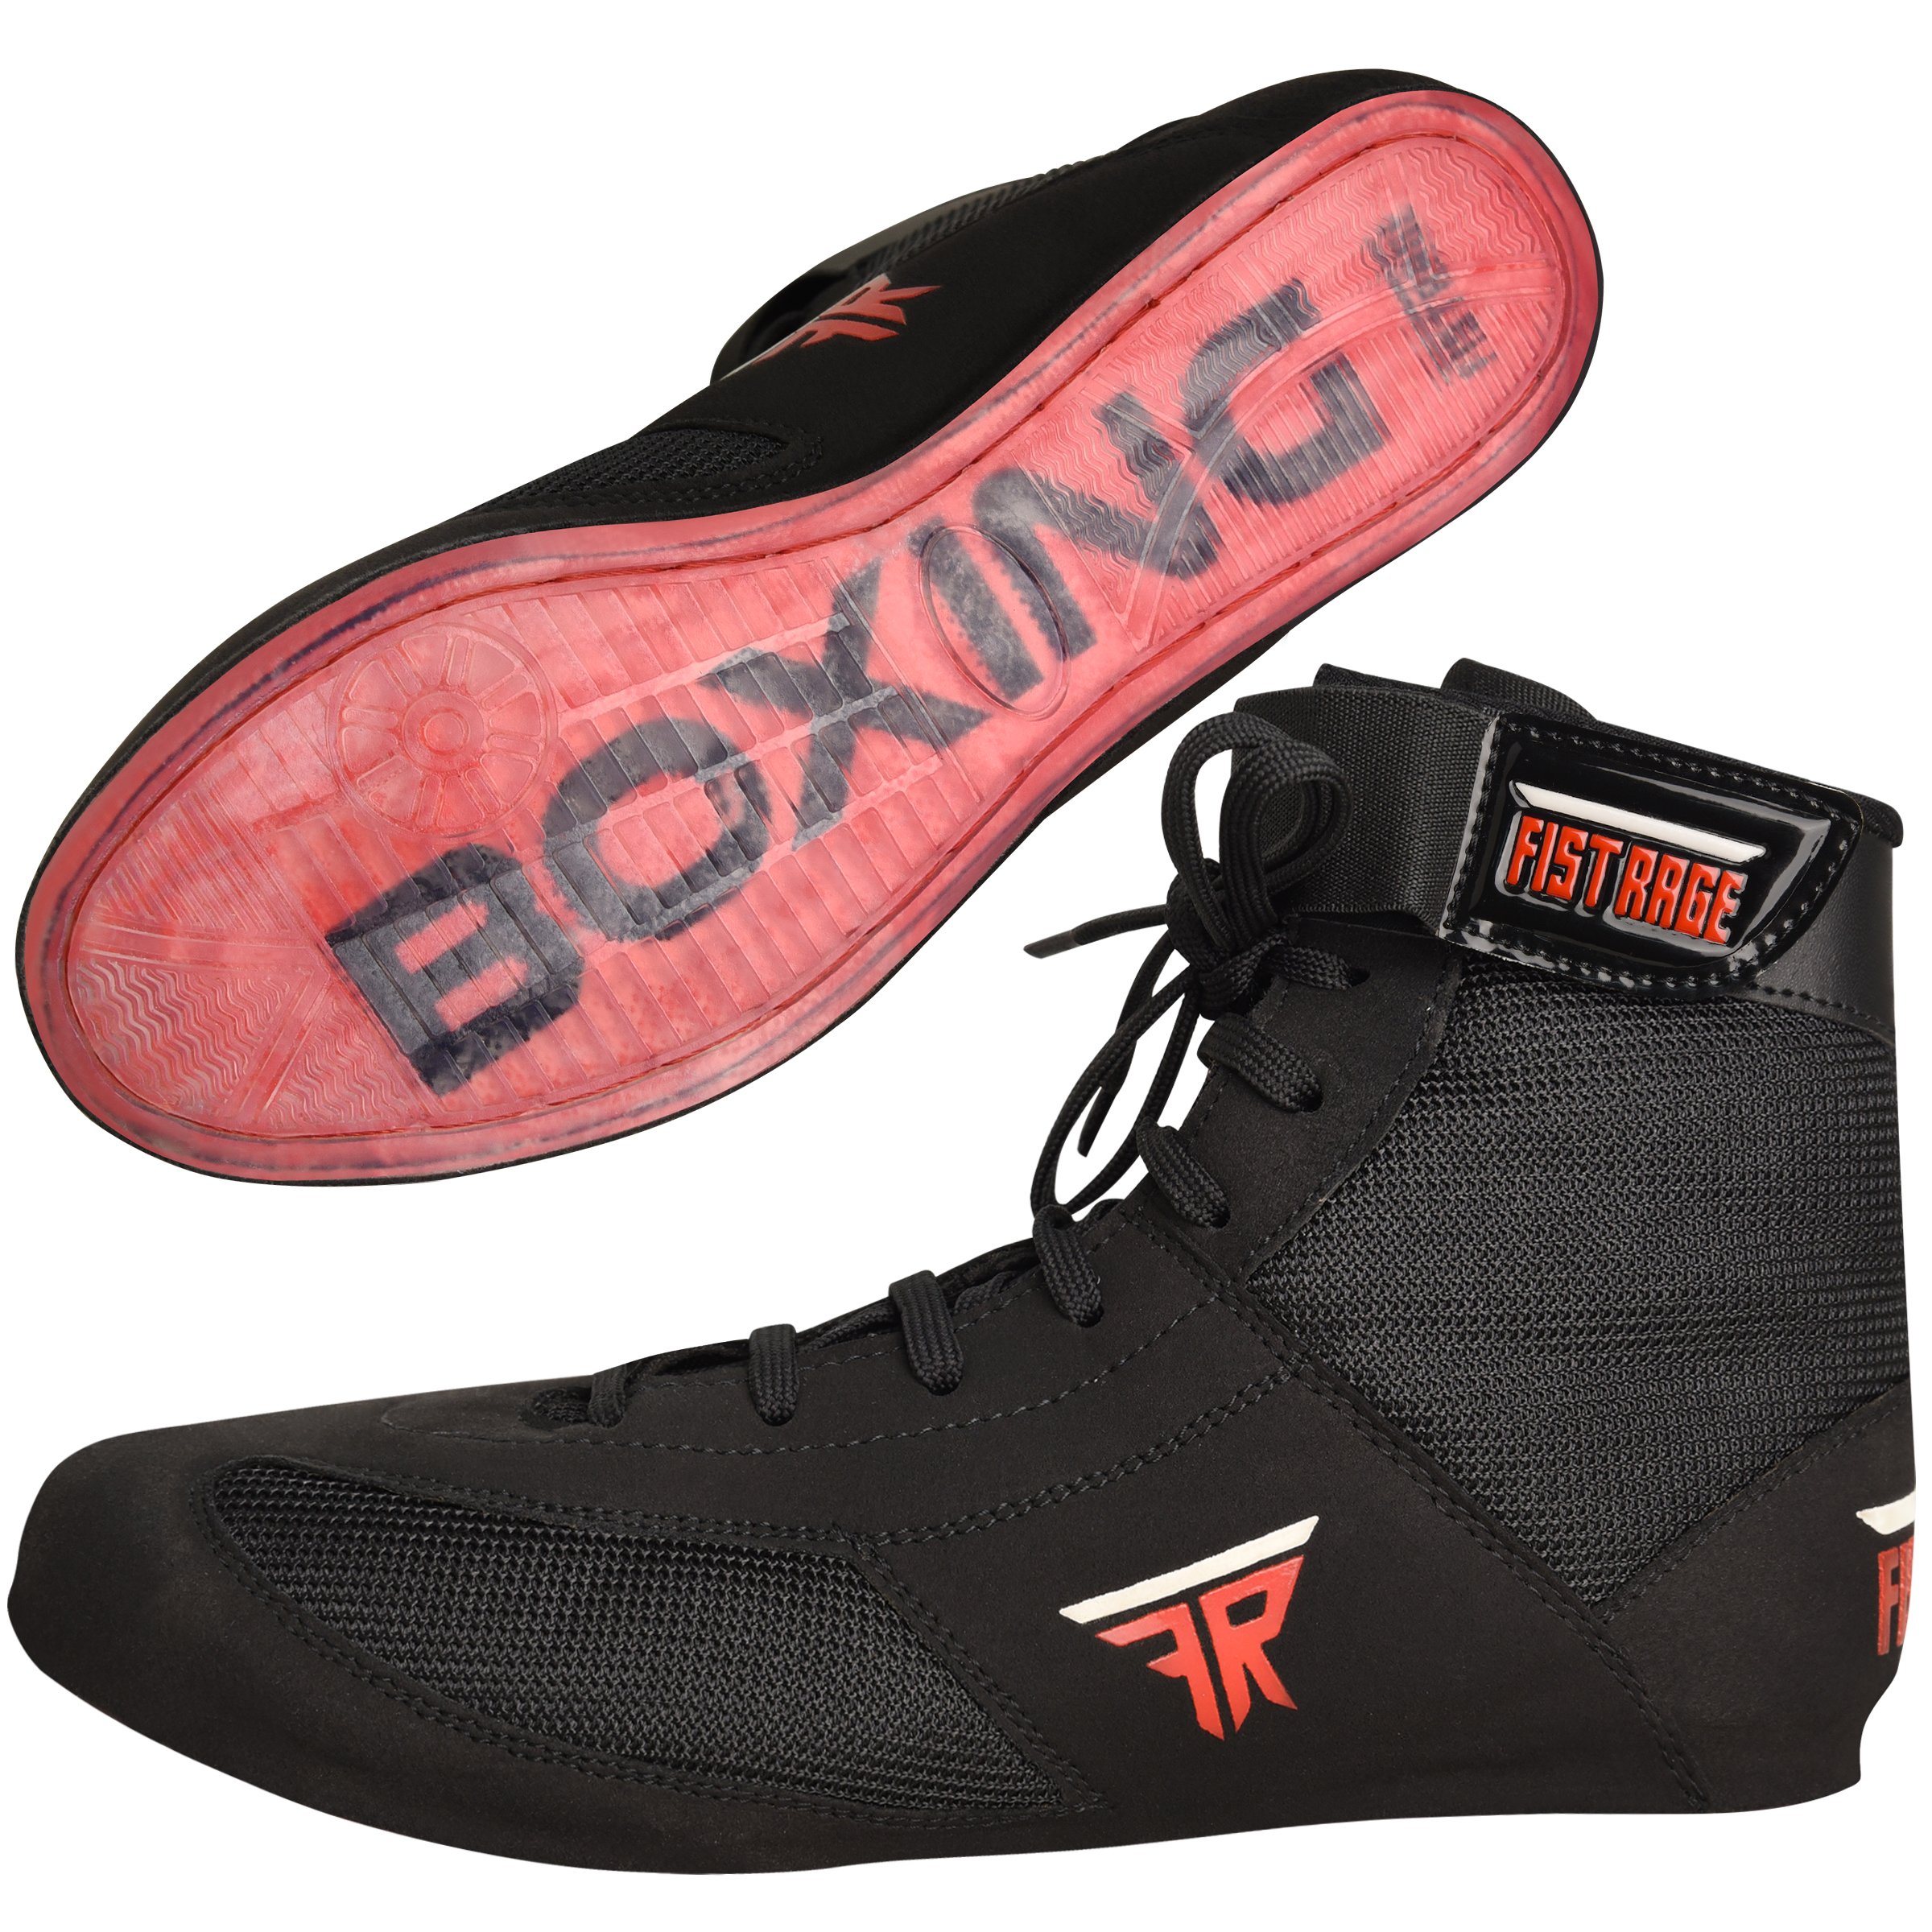 FISTRAGE HALF BOXING SHOES - image 5 of 8